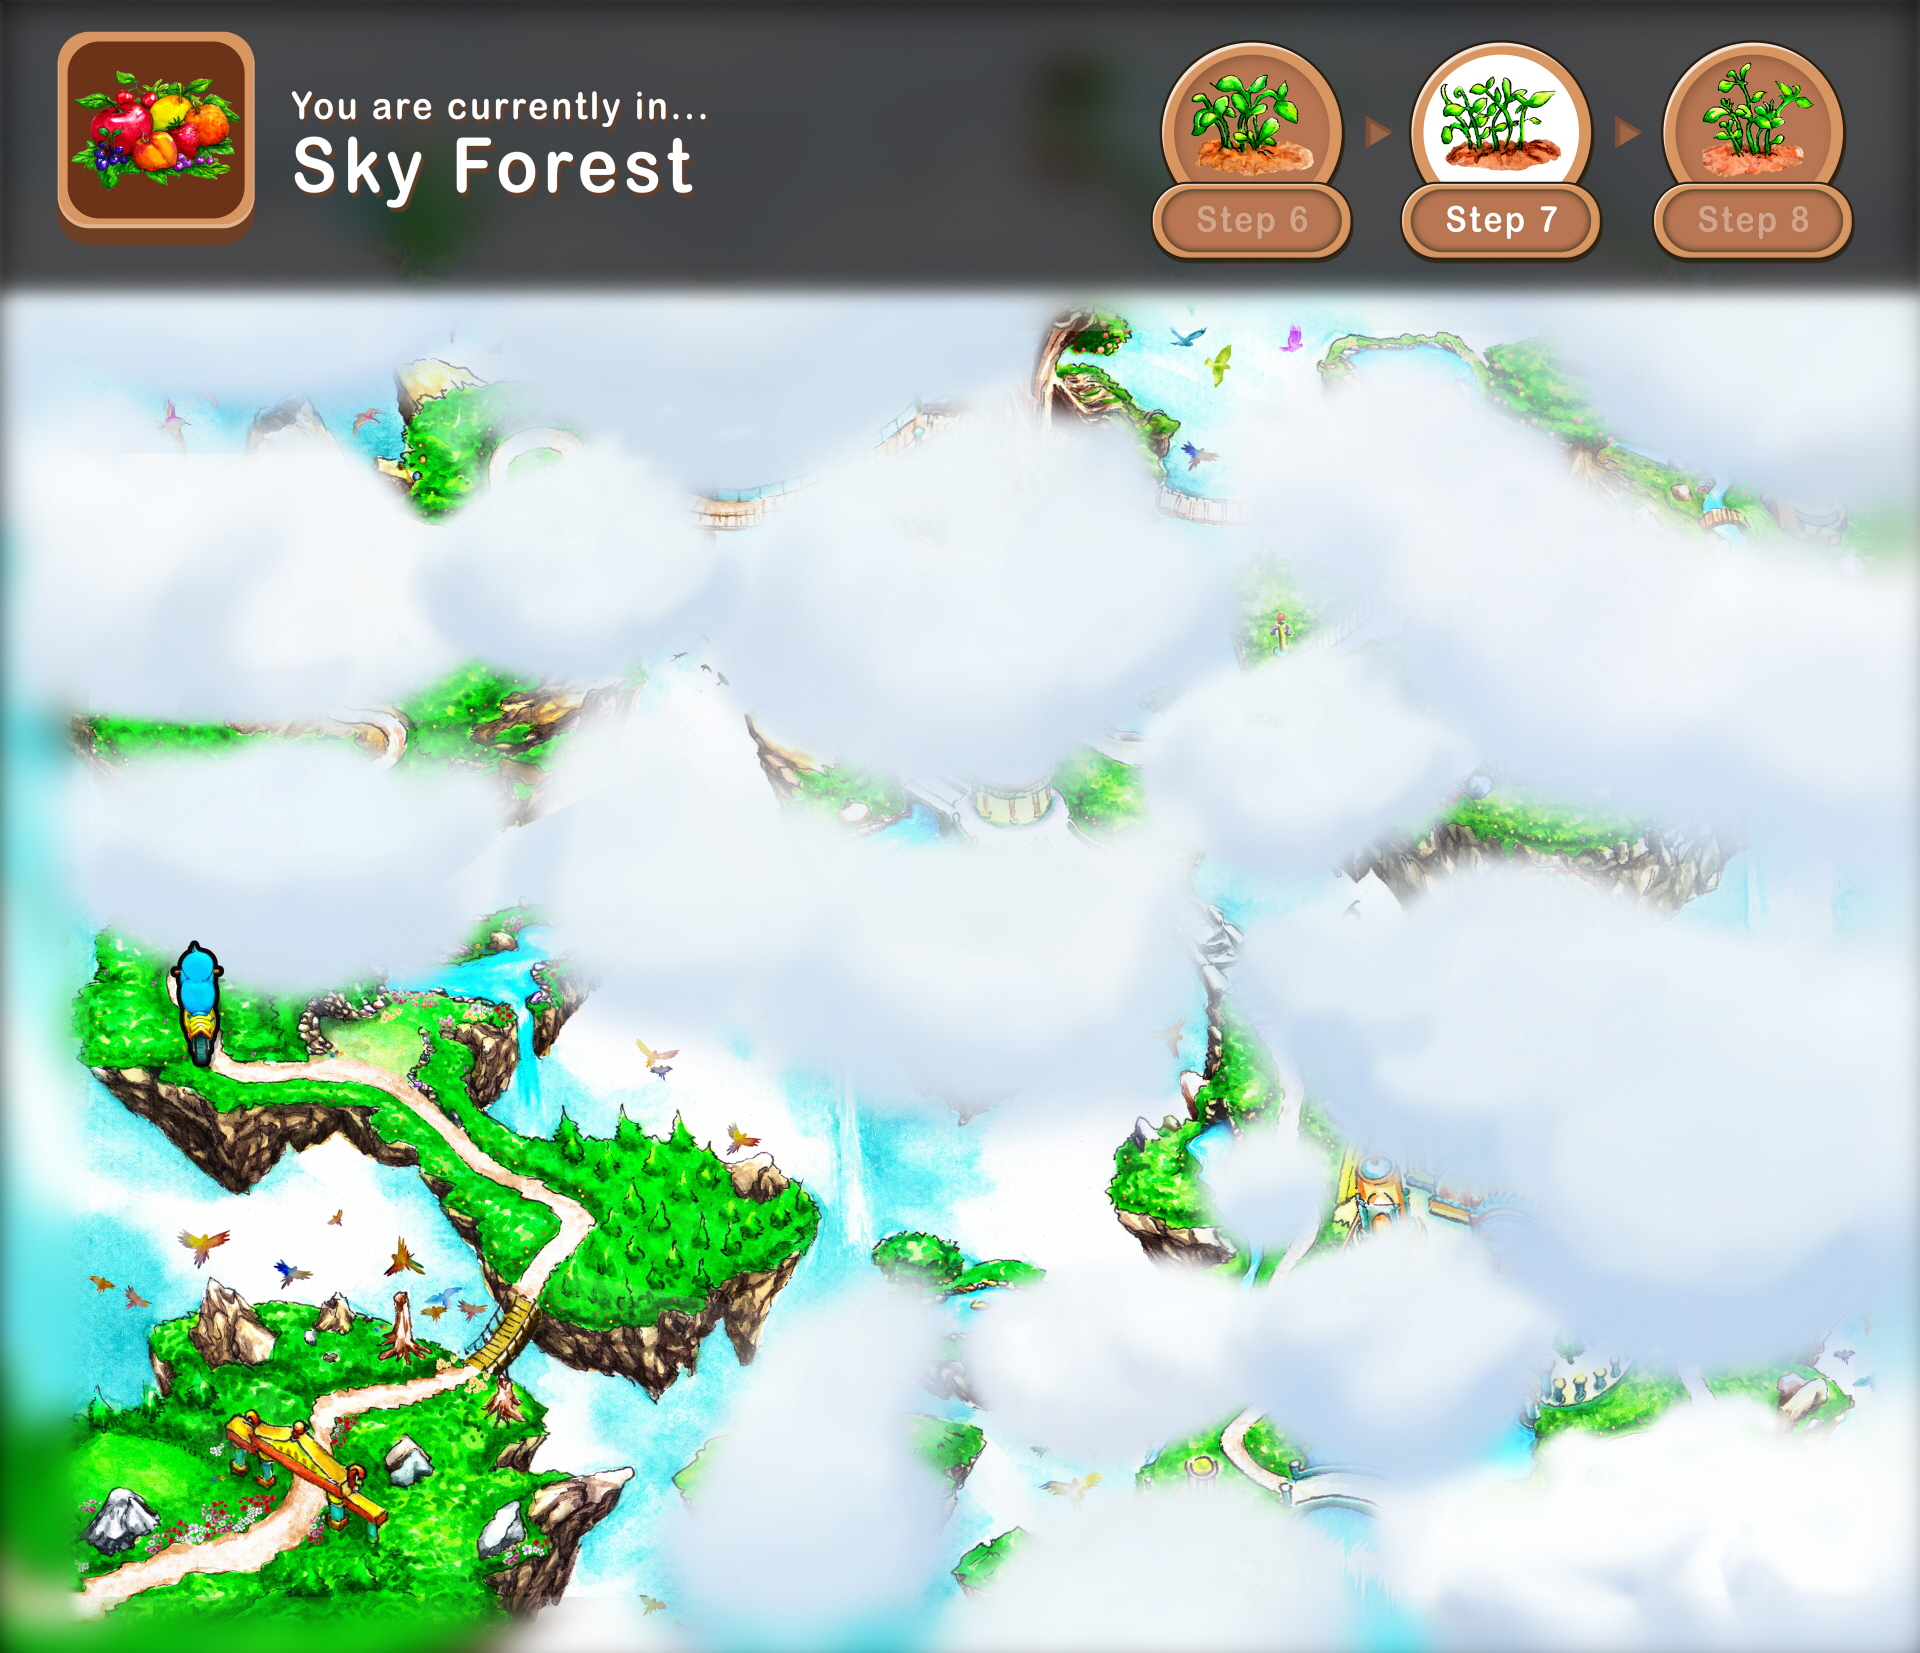 Sky Forest